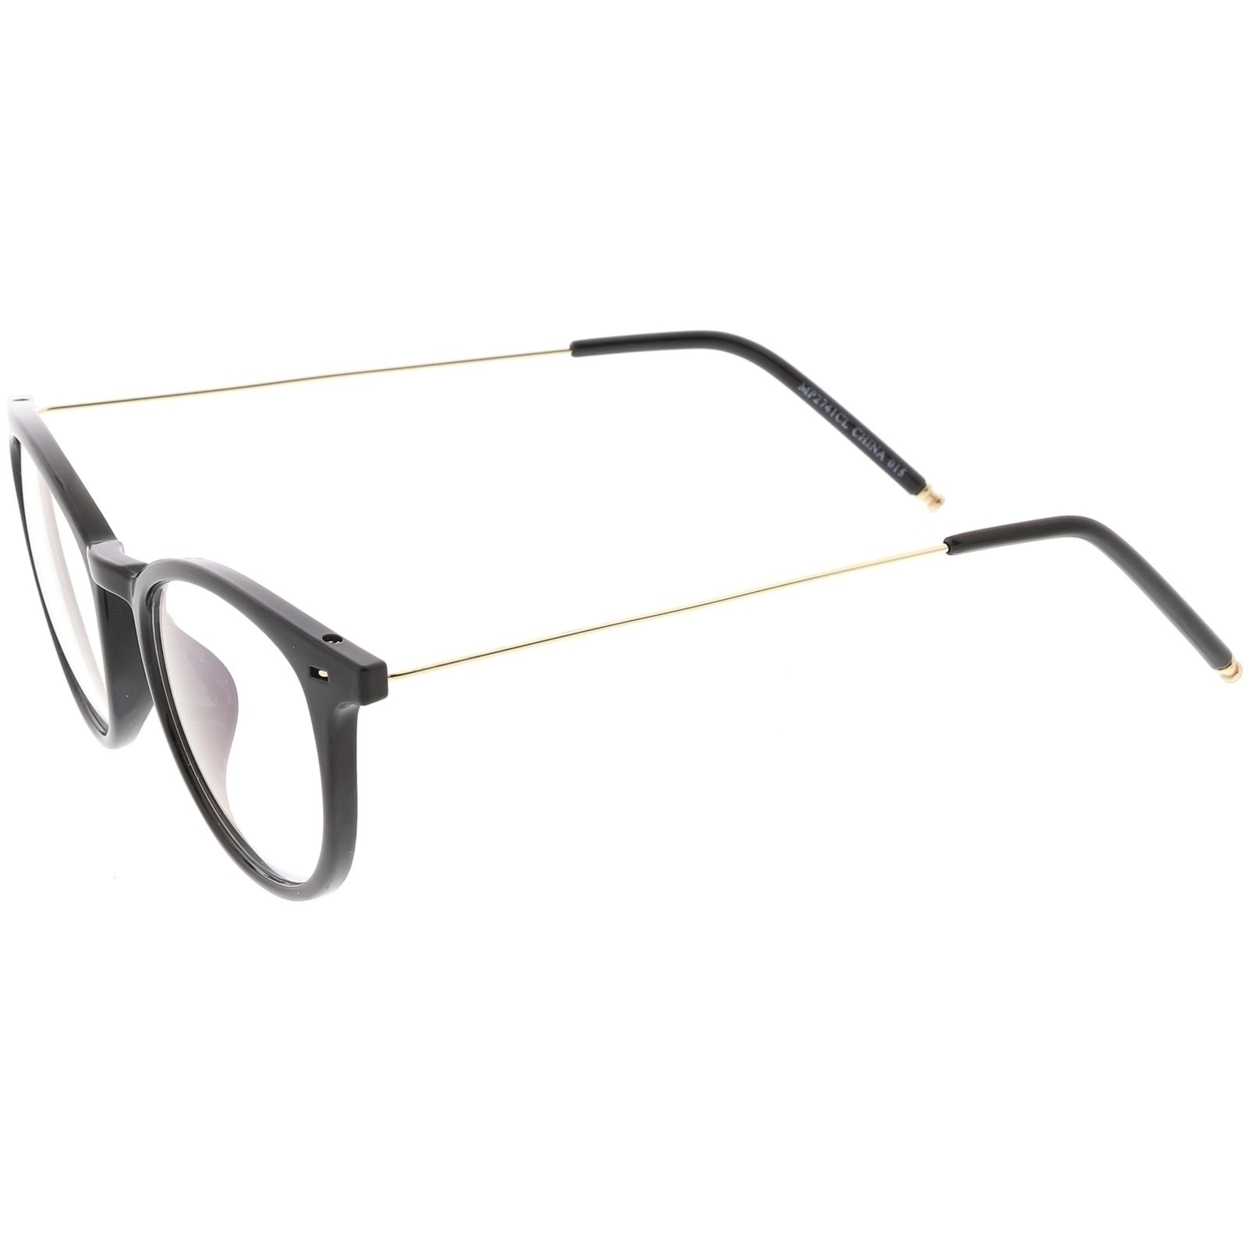 Vintage Inspired Horn Rimmed Glasses Ultra Thin Arms Round Clear Lens 48mm - Black Gold / Clear